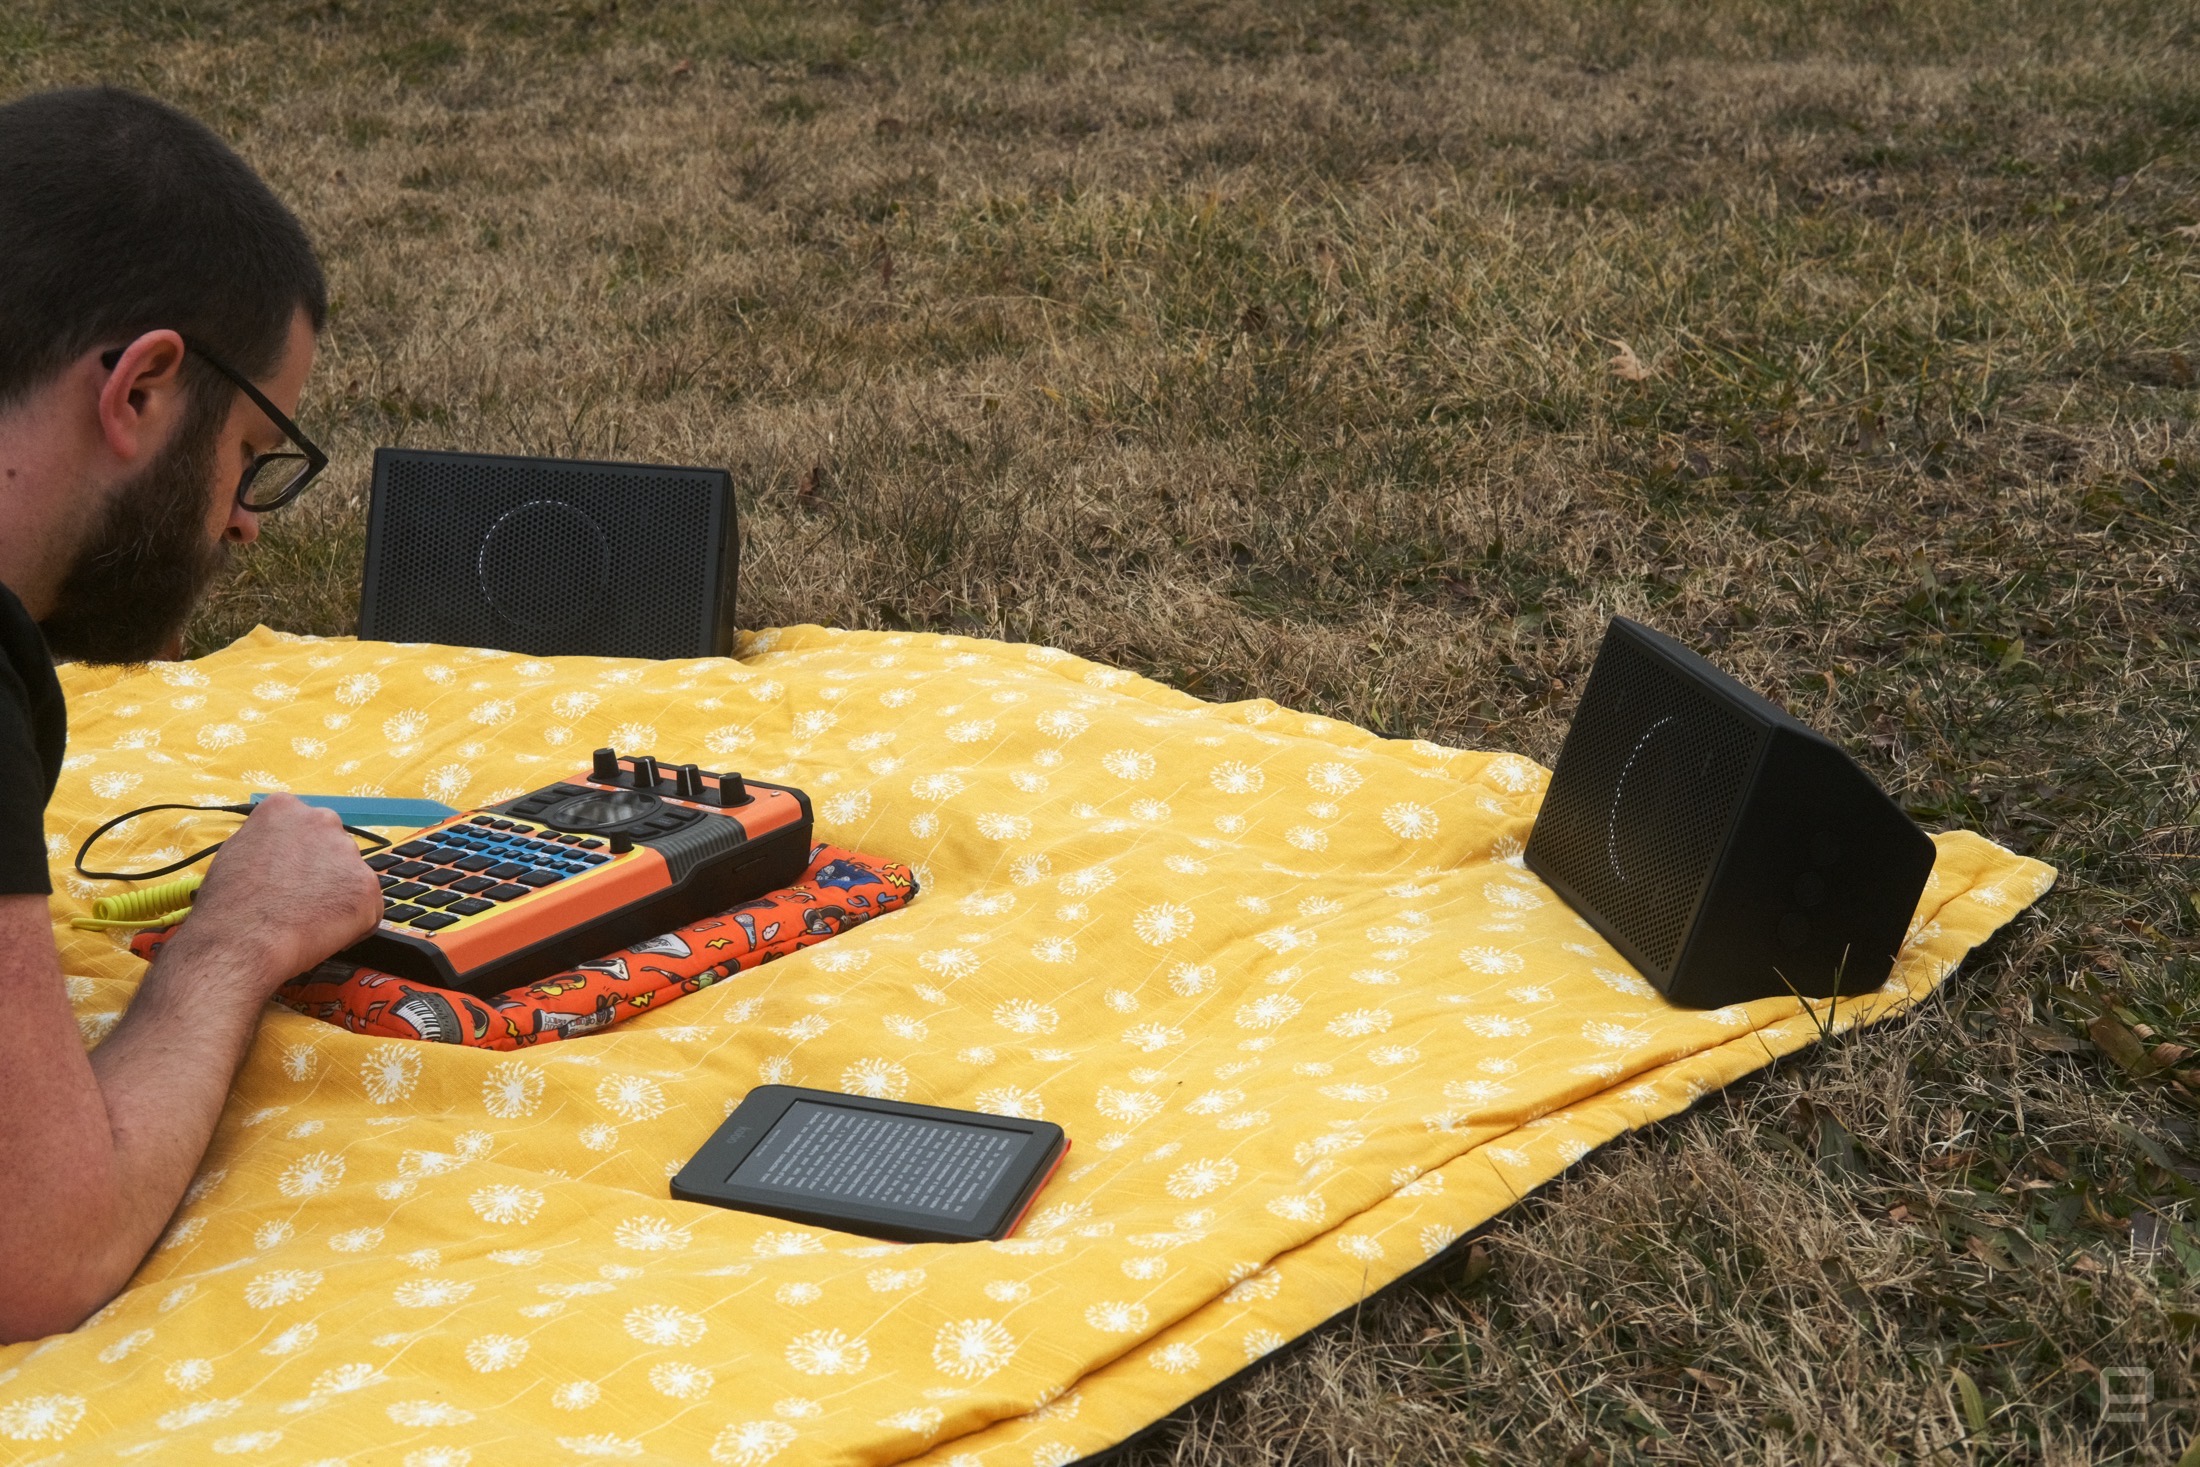 AIAIAI Unit 4 Wireless+ studio monitors in park on a picnic blanket while I annoys Saturday morning jogger by blasting mediocre beats from an SP-404 MKII.